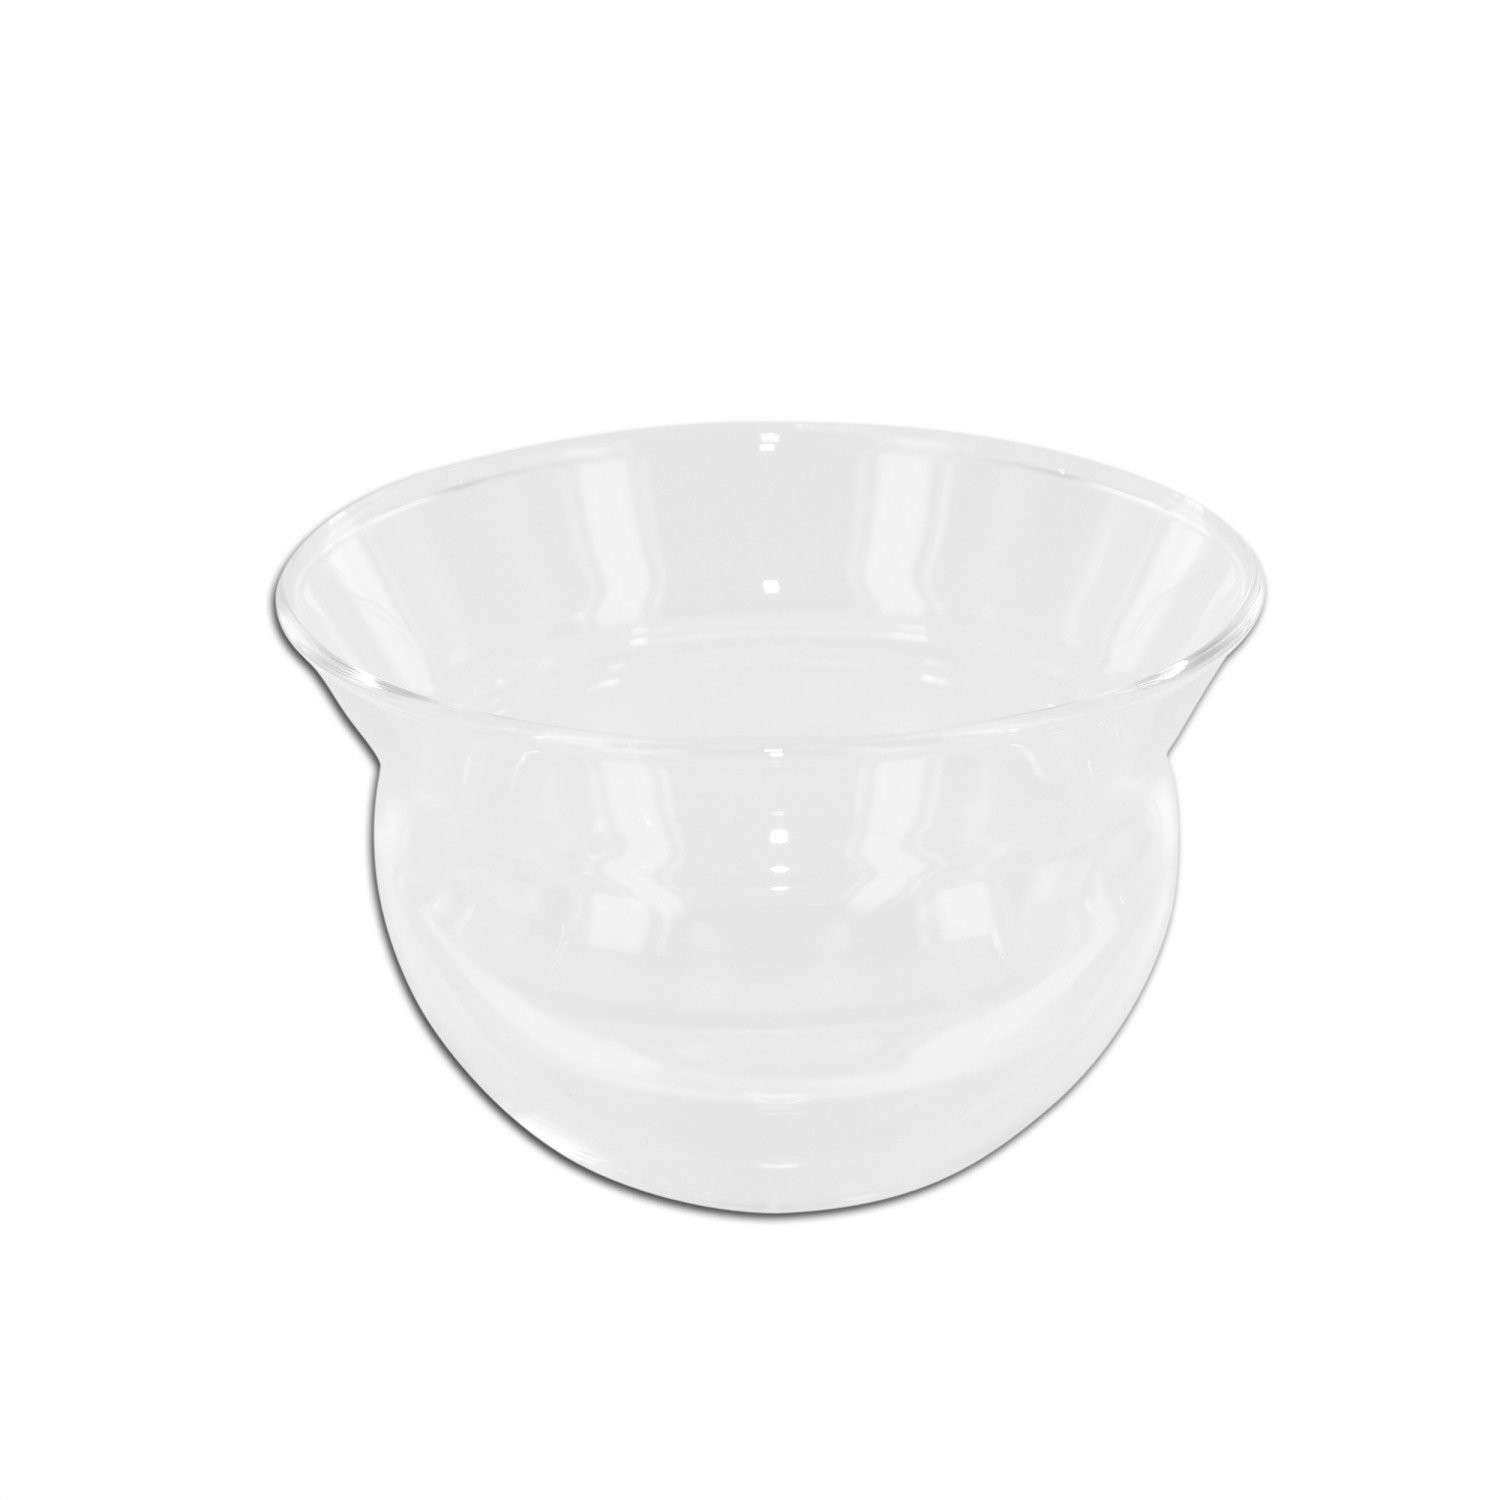 Replacement glass teacup_44290.jpg